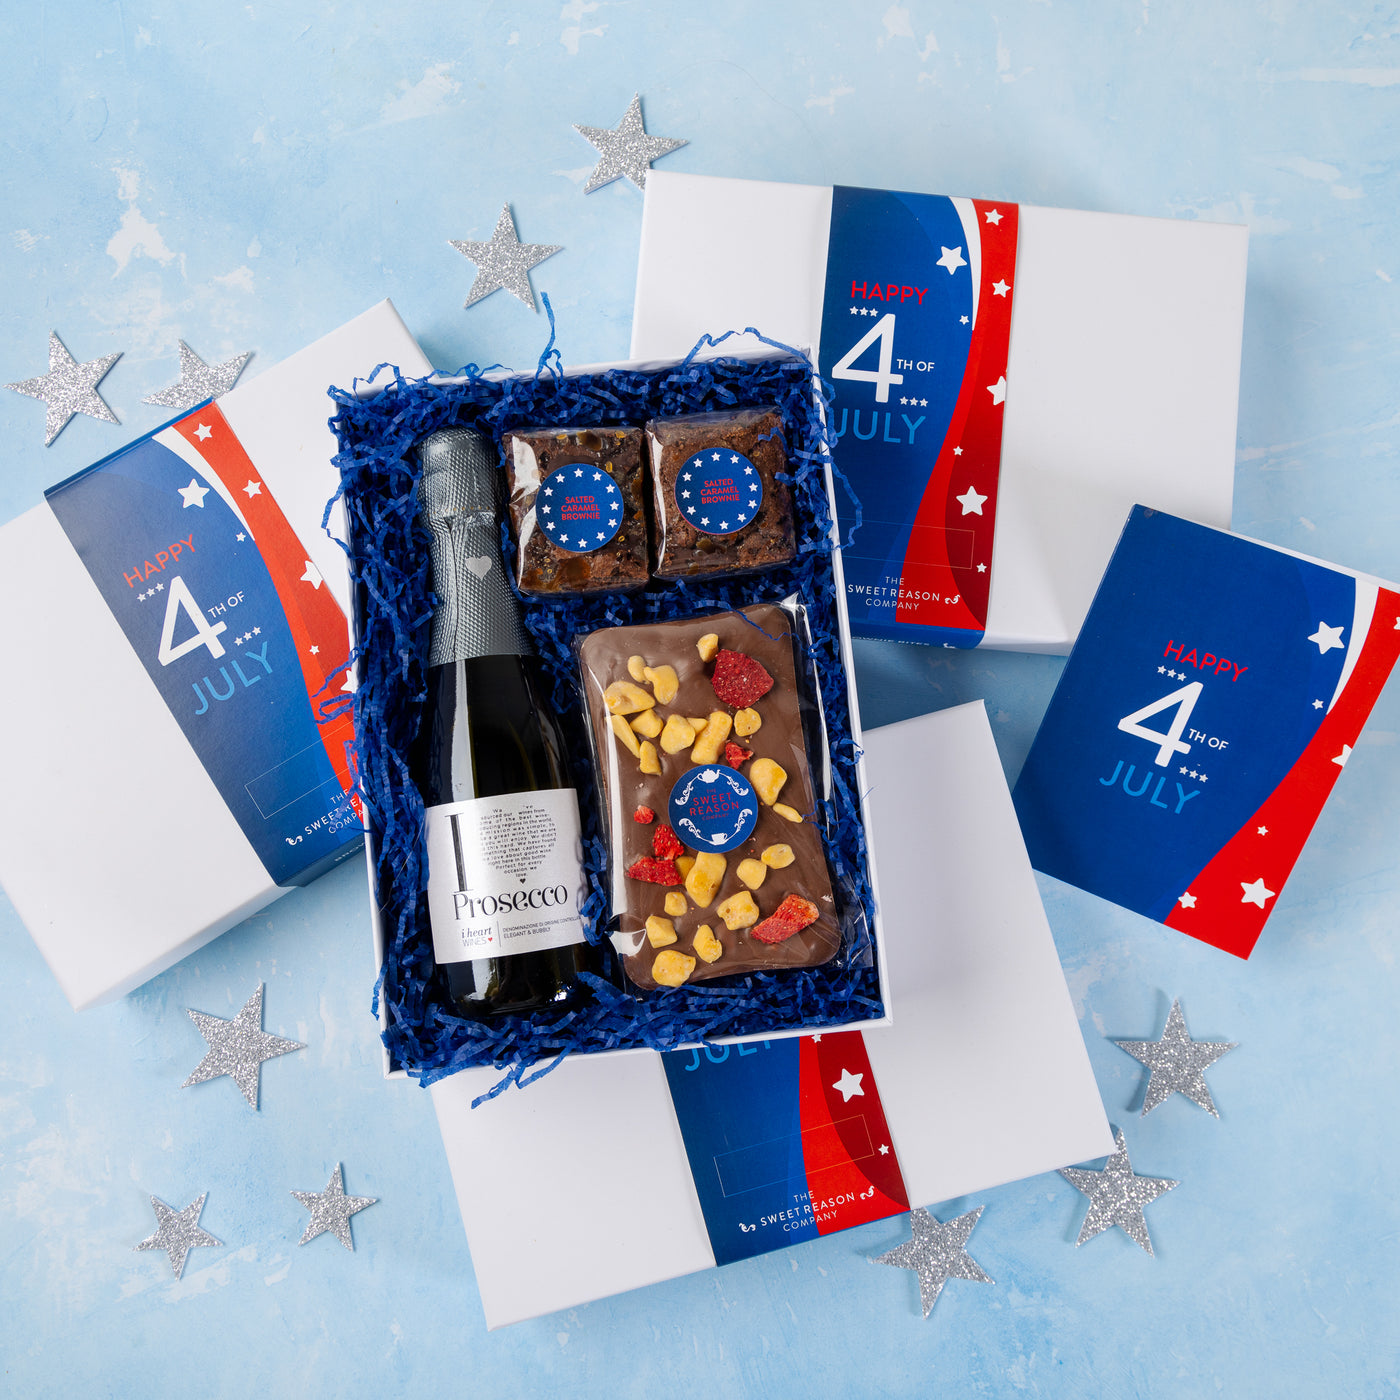 'Happy 4th of July' Chocolate Slab, Brownies and Prosecco